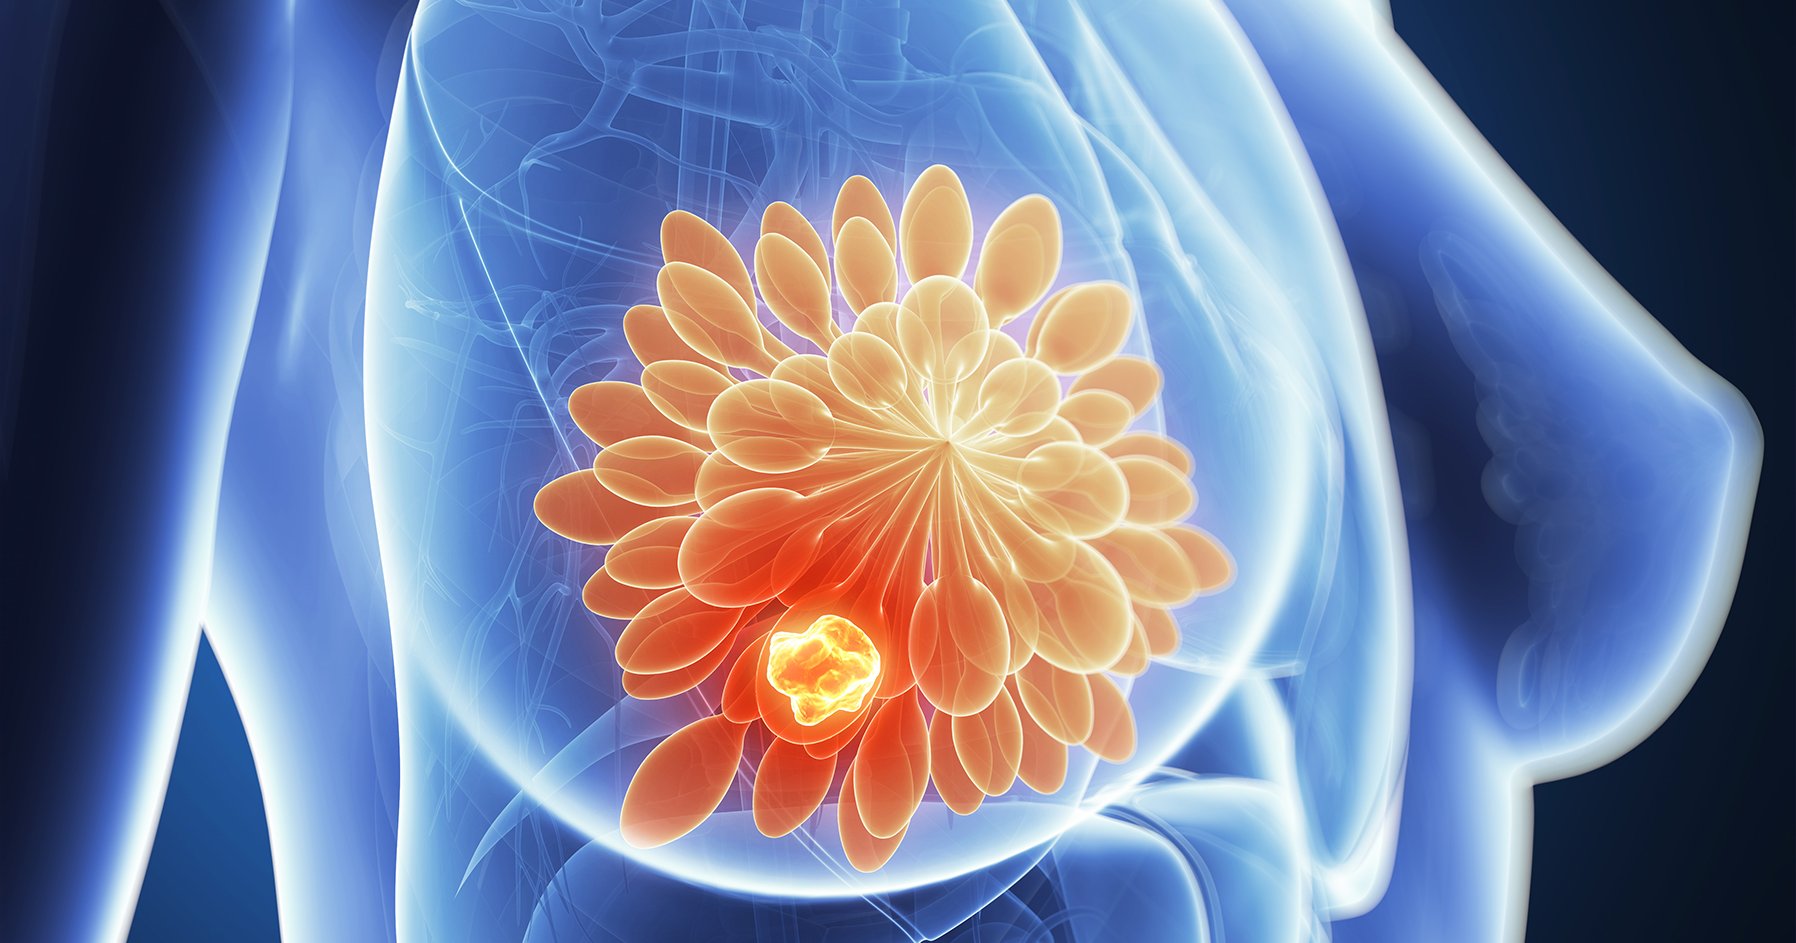 Image of breast cancer in the body.